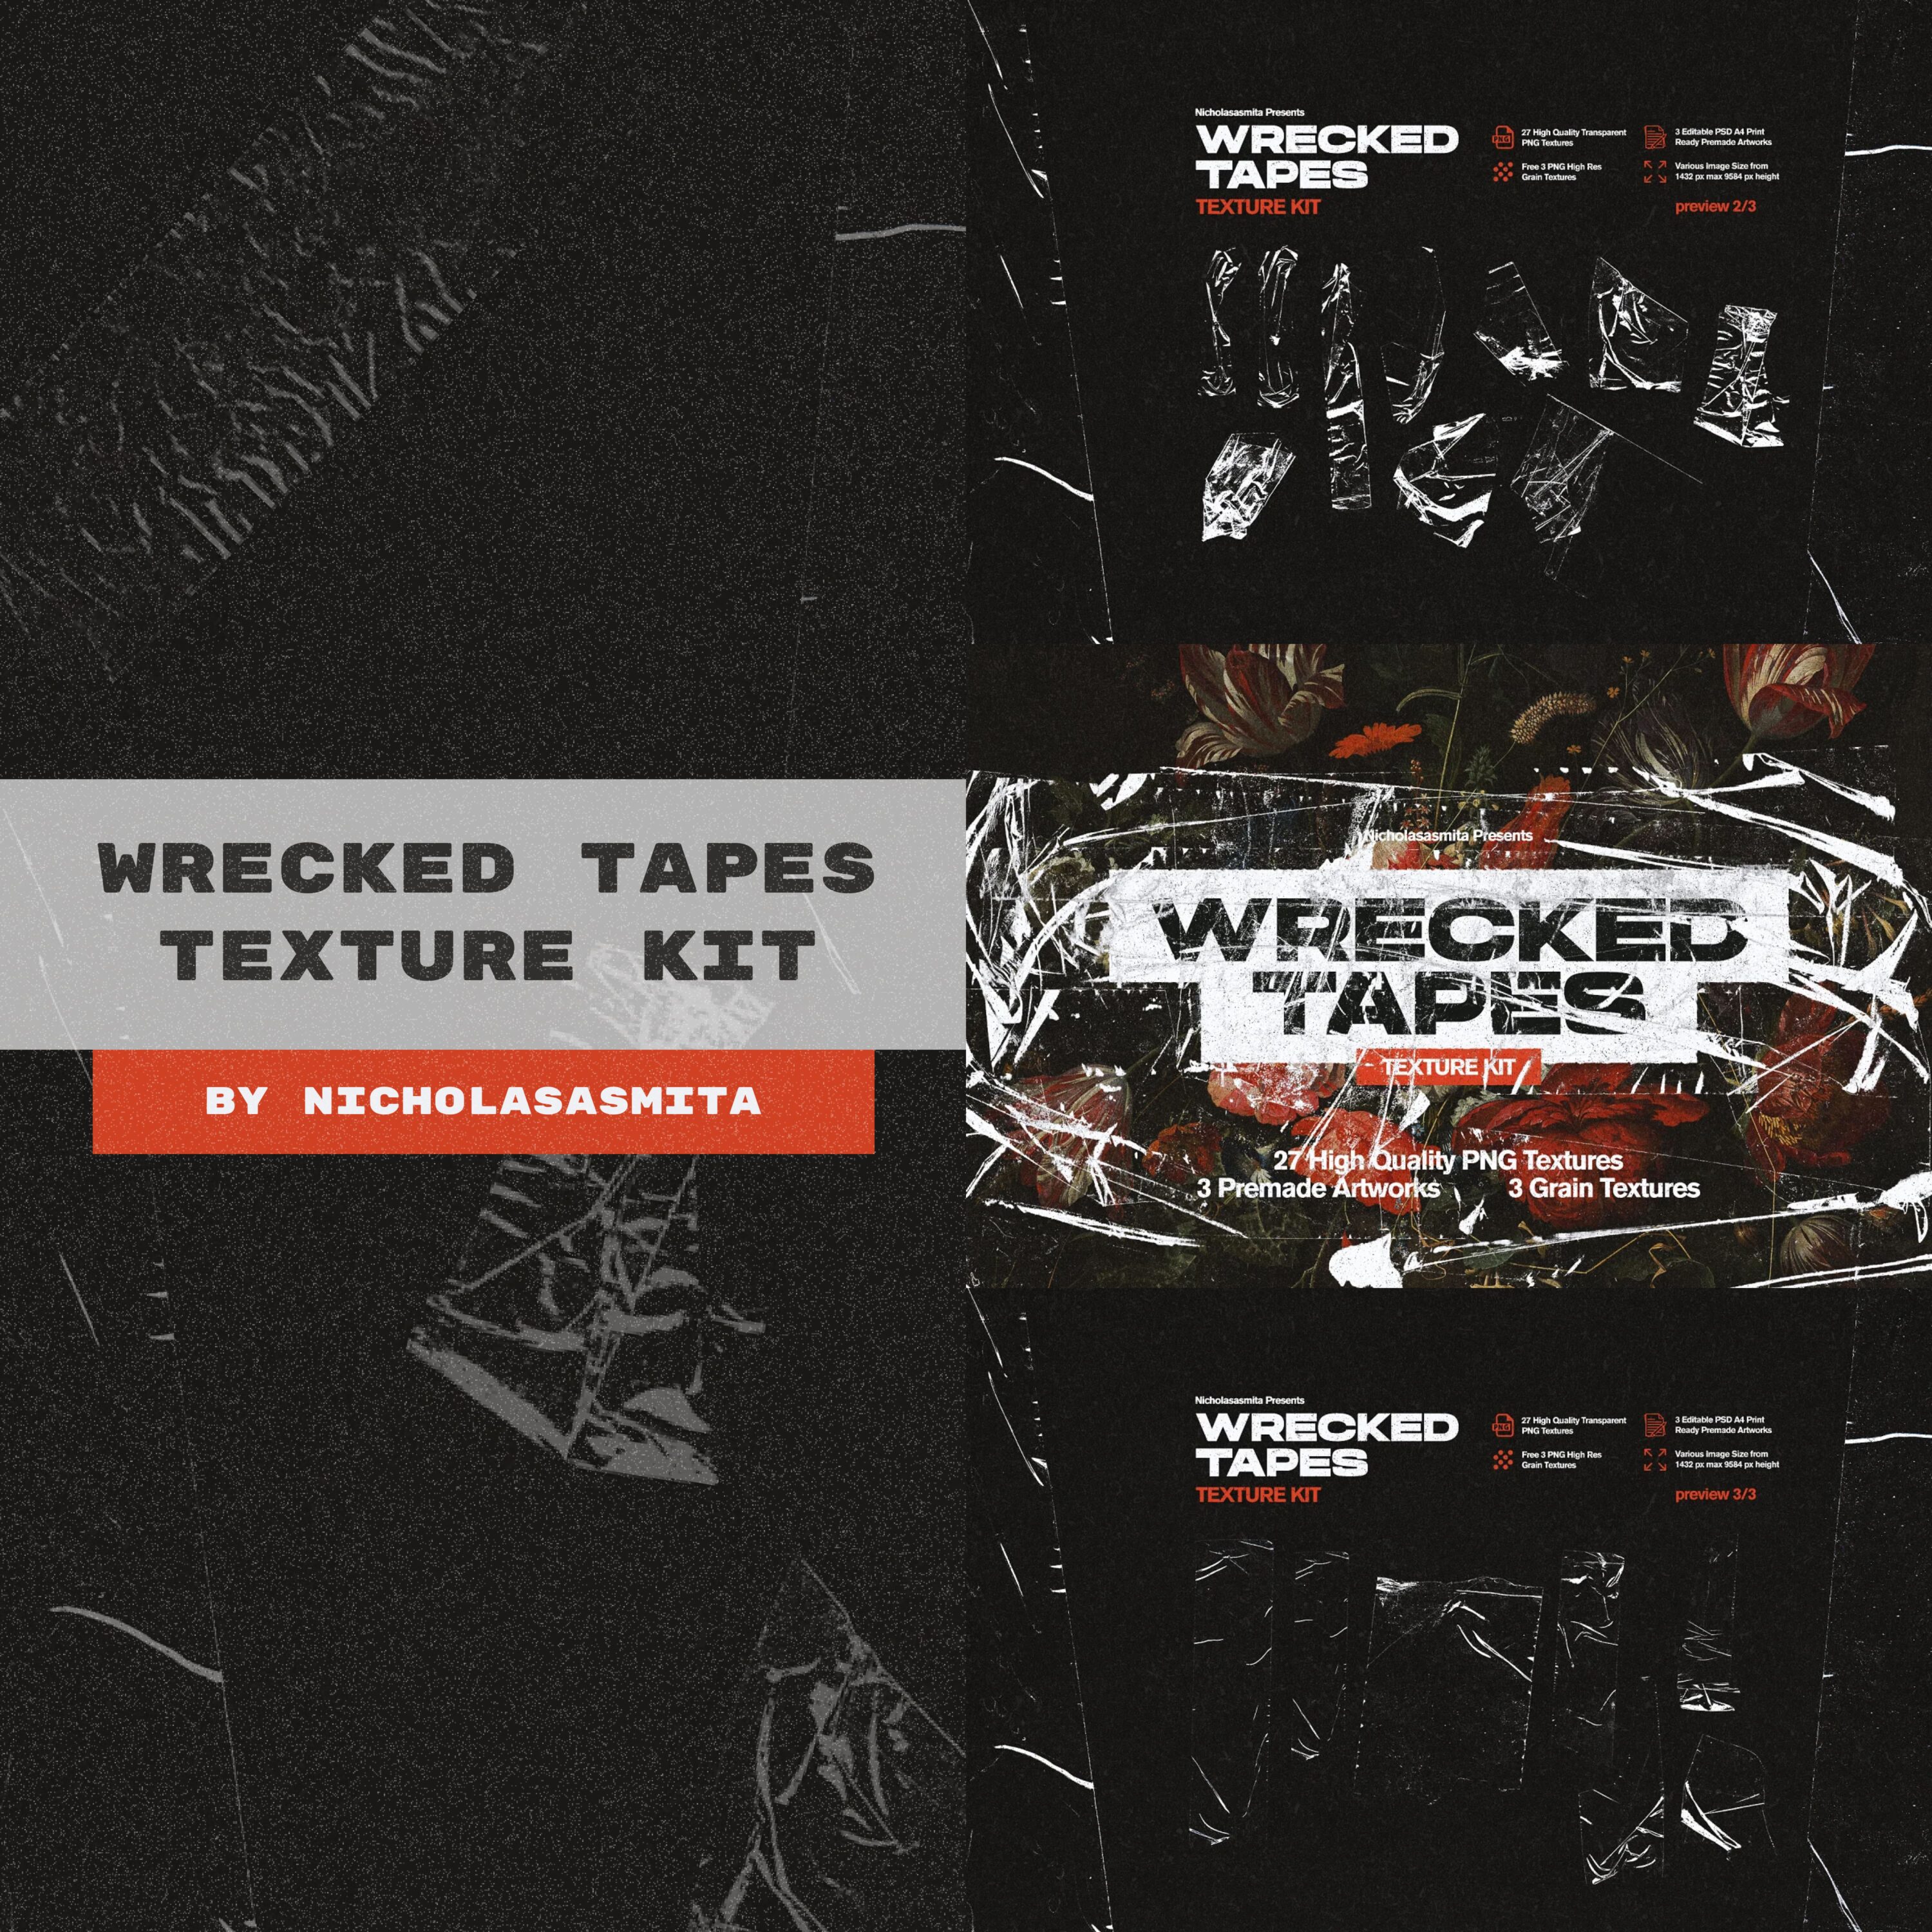 Wrecked Tapes Texture Kit cover image.